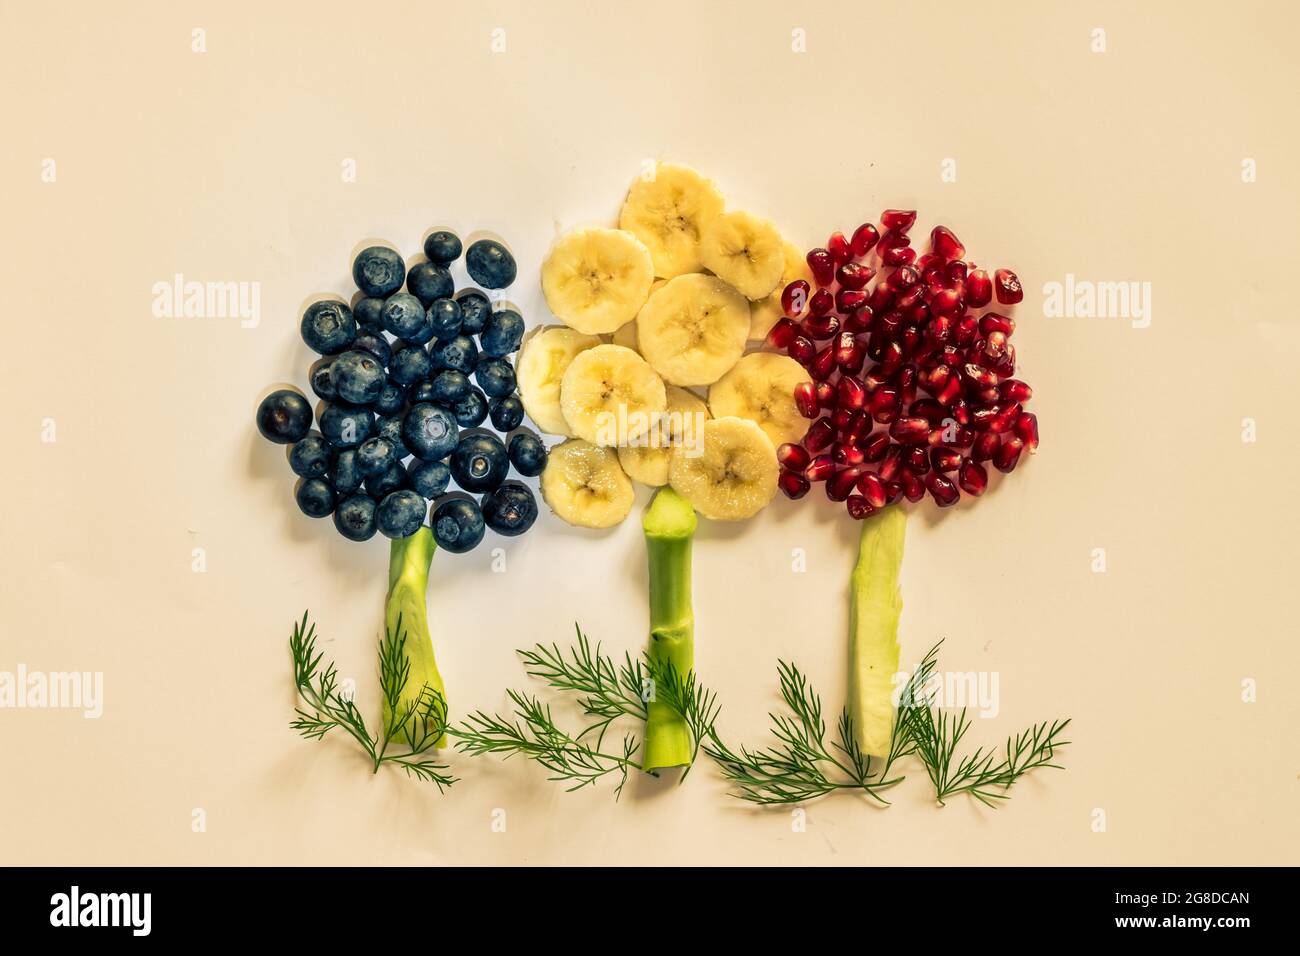 fruit trees made from banana, blueberries, pomegranate apples isolated on yellow backgrounds Stock Photo